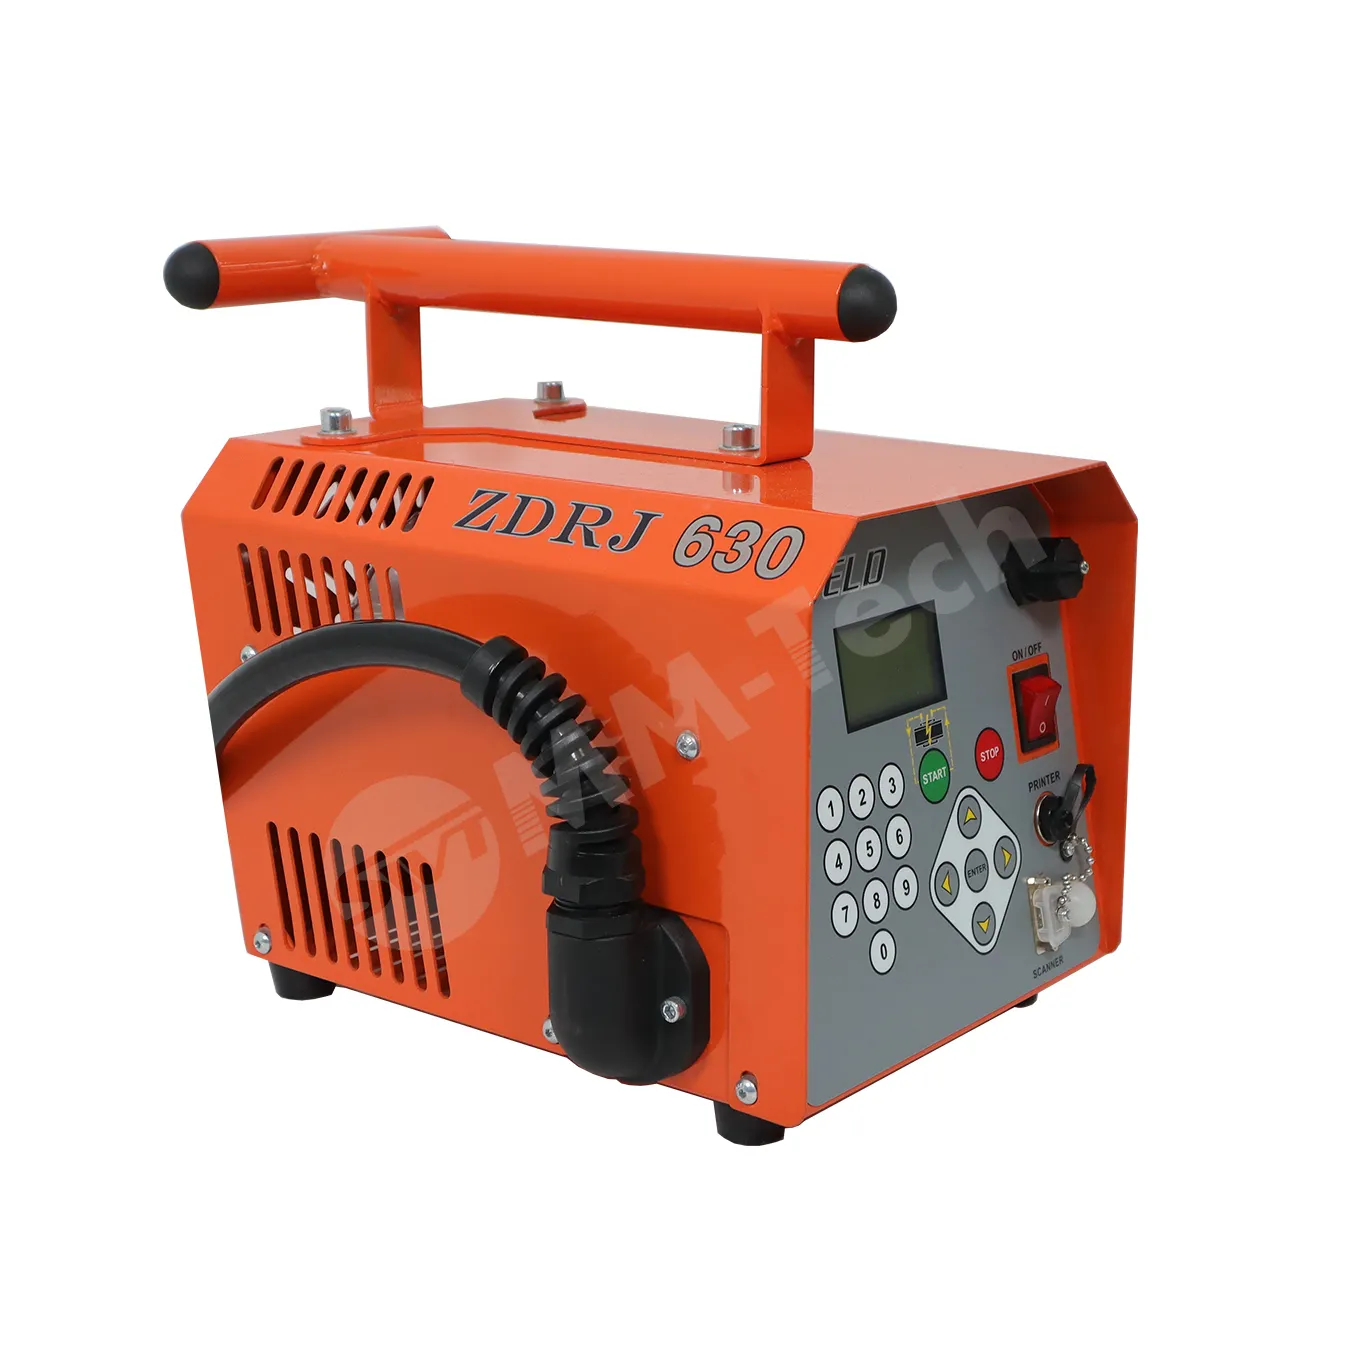 ZDRJ-315 20-315mm HDPE Pipe HDPE Pipe Full-Automatic Electrofusion Welding Machine